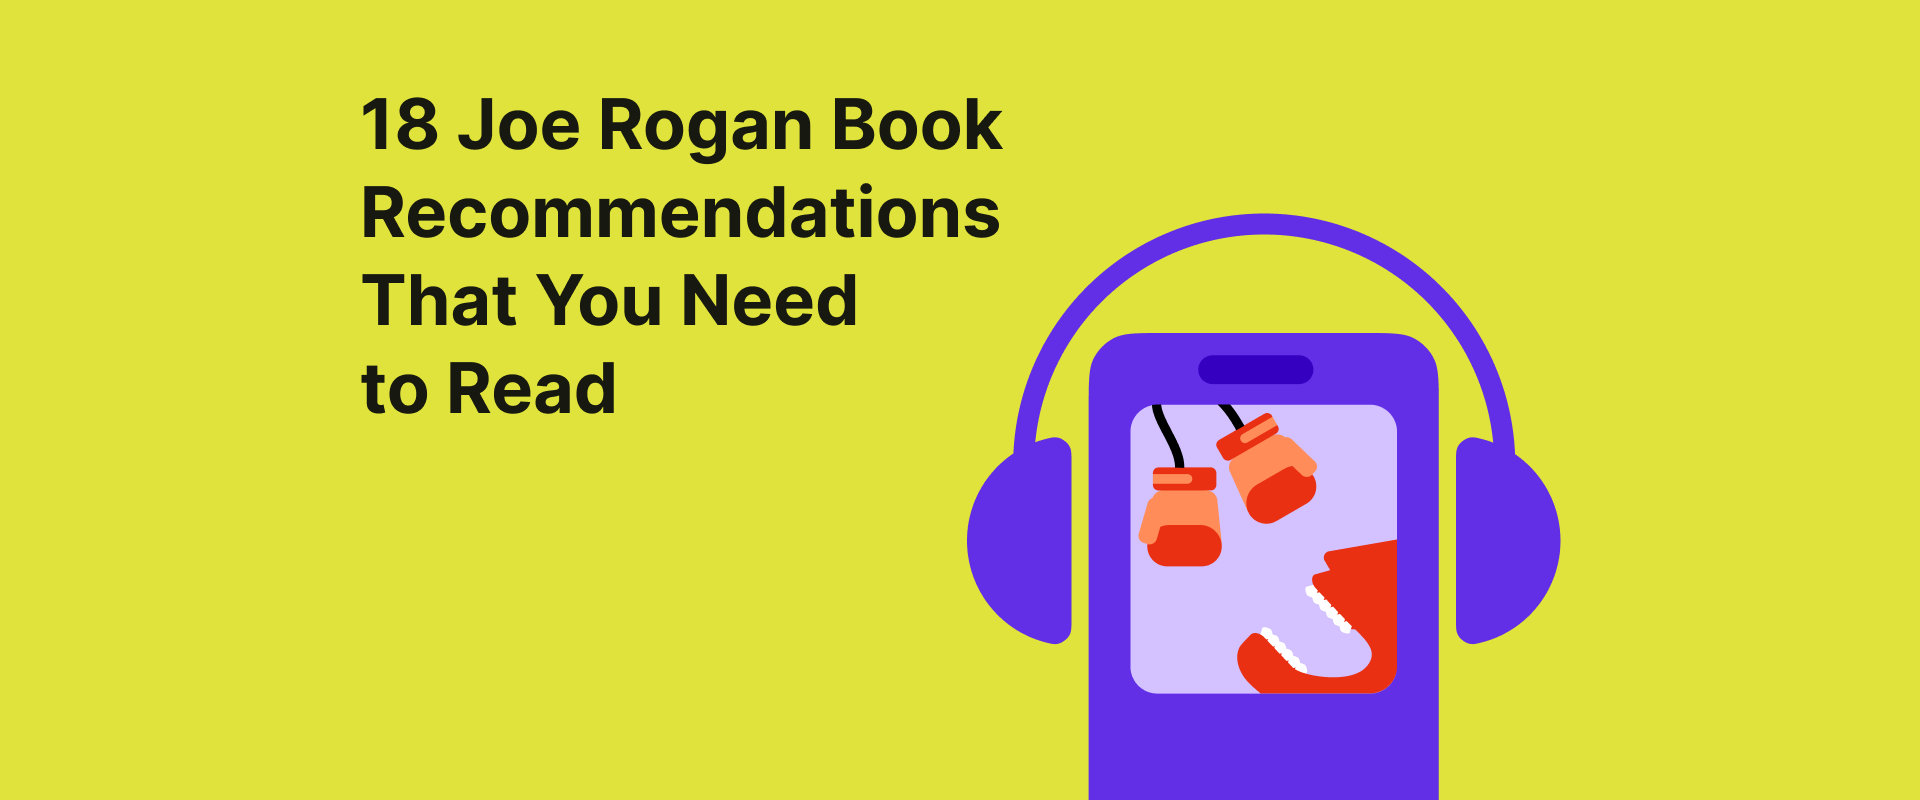 18 Joe Rogan Book Recommendations That You Need to Read